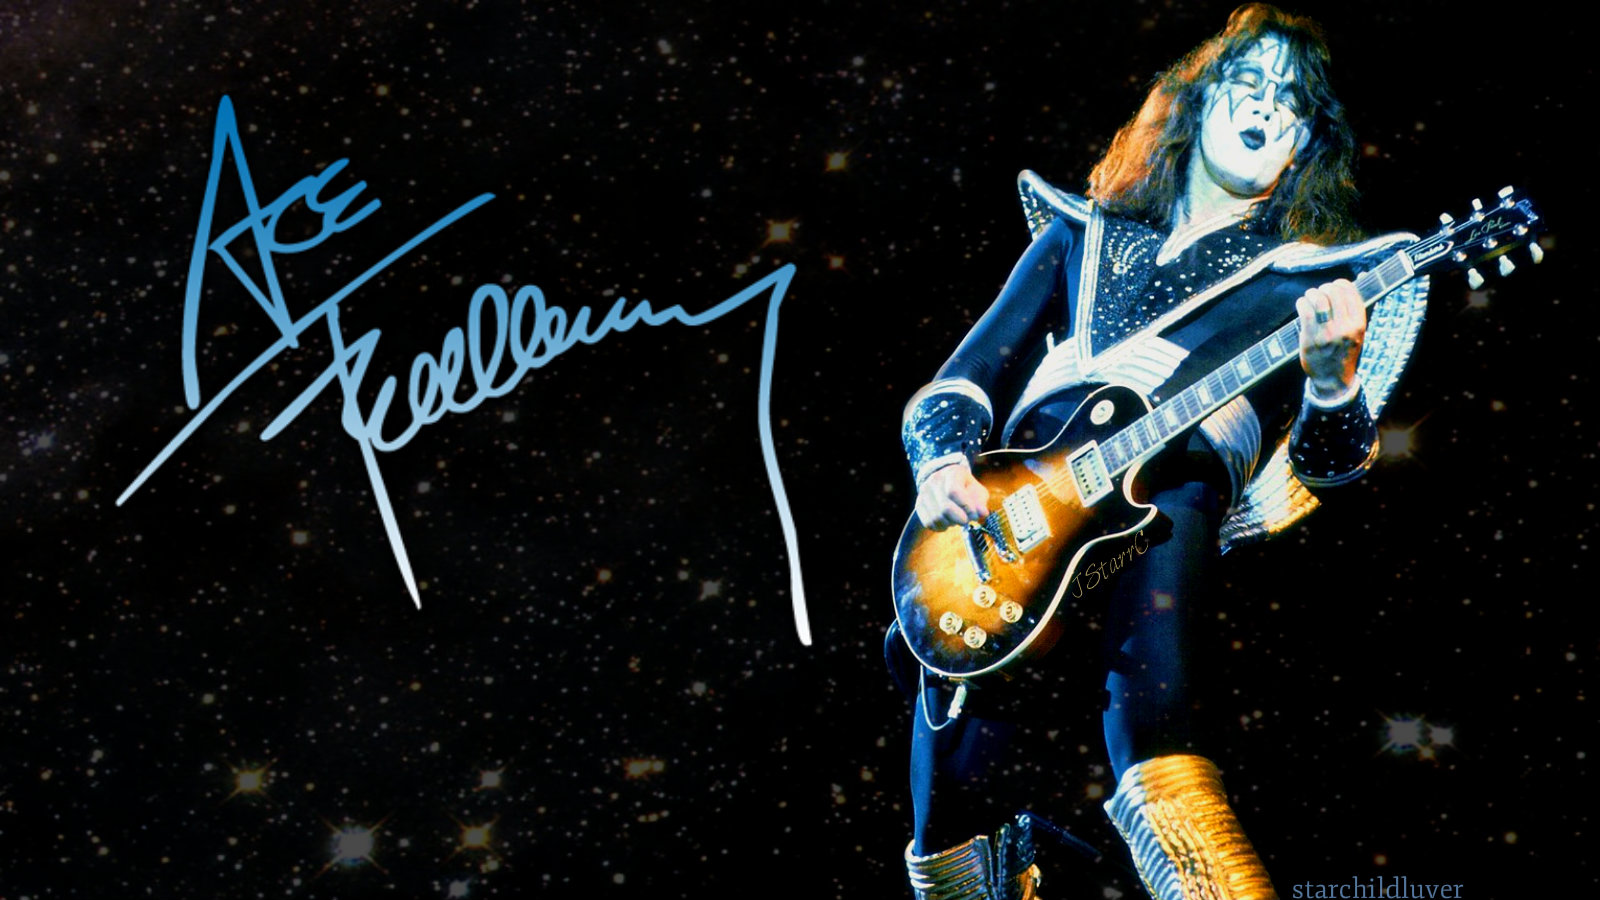 Ace Frehley Wallpaper